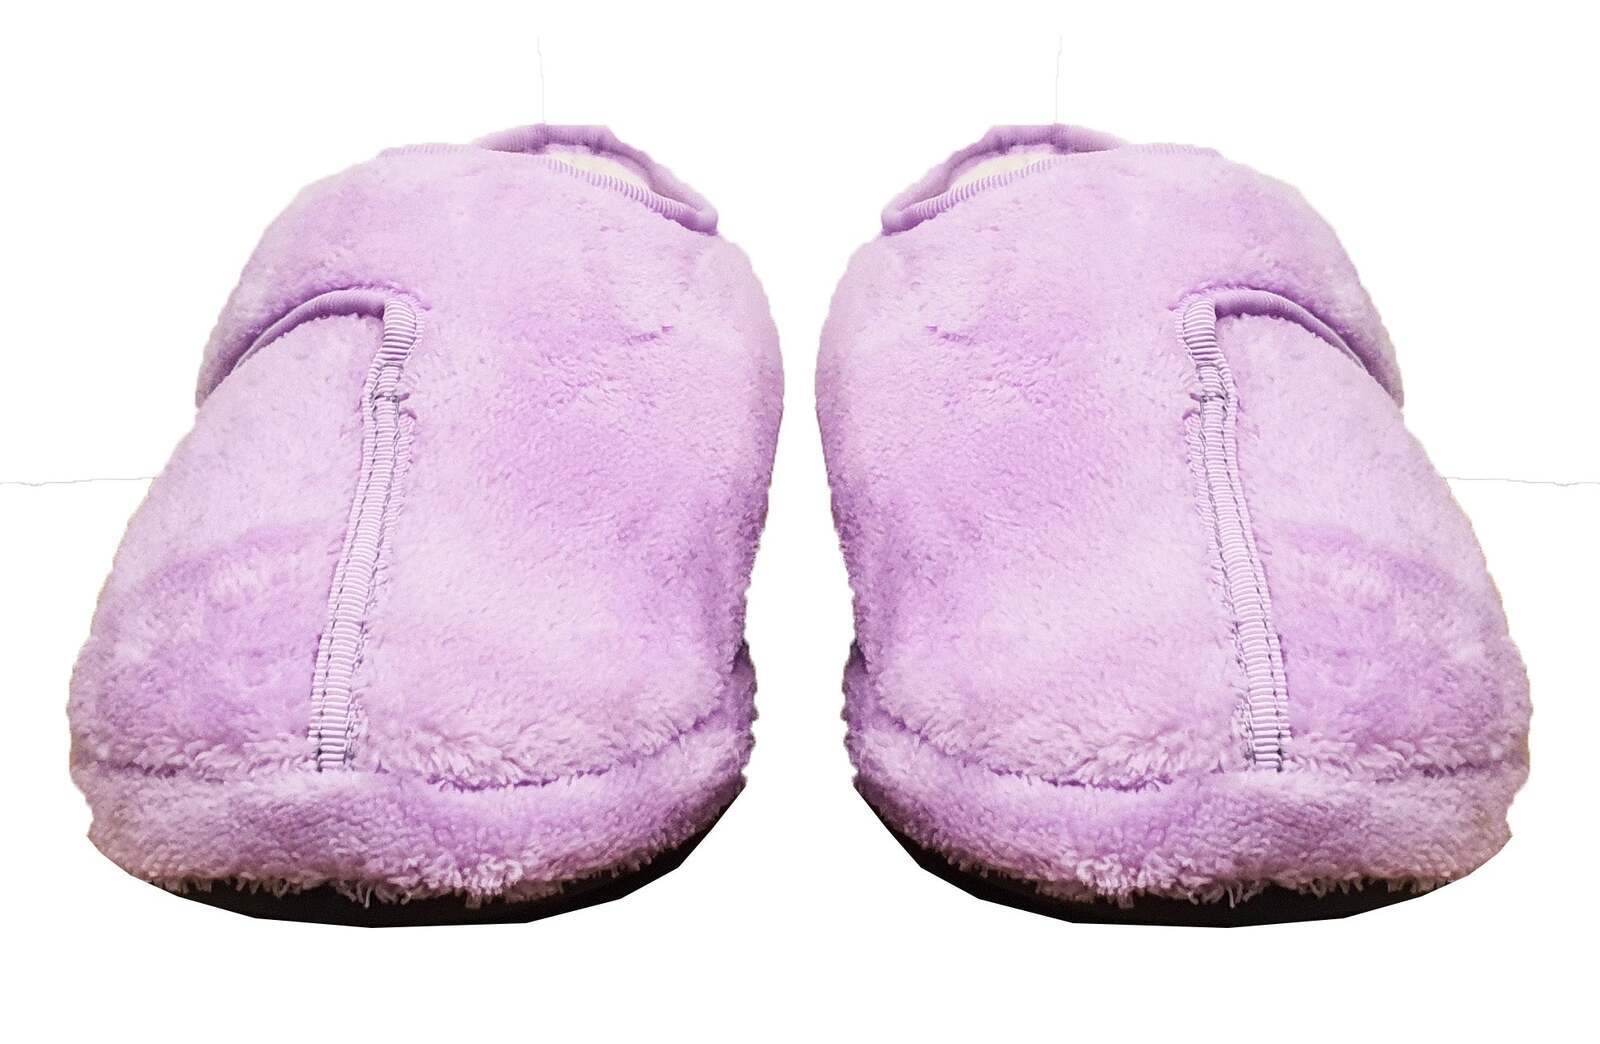 ARCHLINE Orthotic Plus Slippers Closed Scuffs Pain Relief Moccasins - Lilac - EU 39